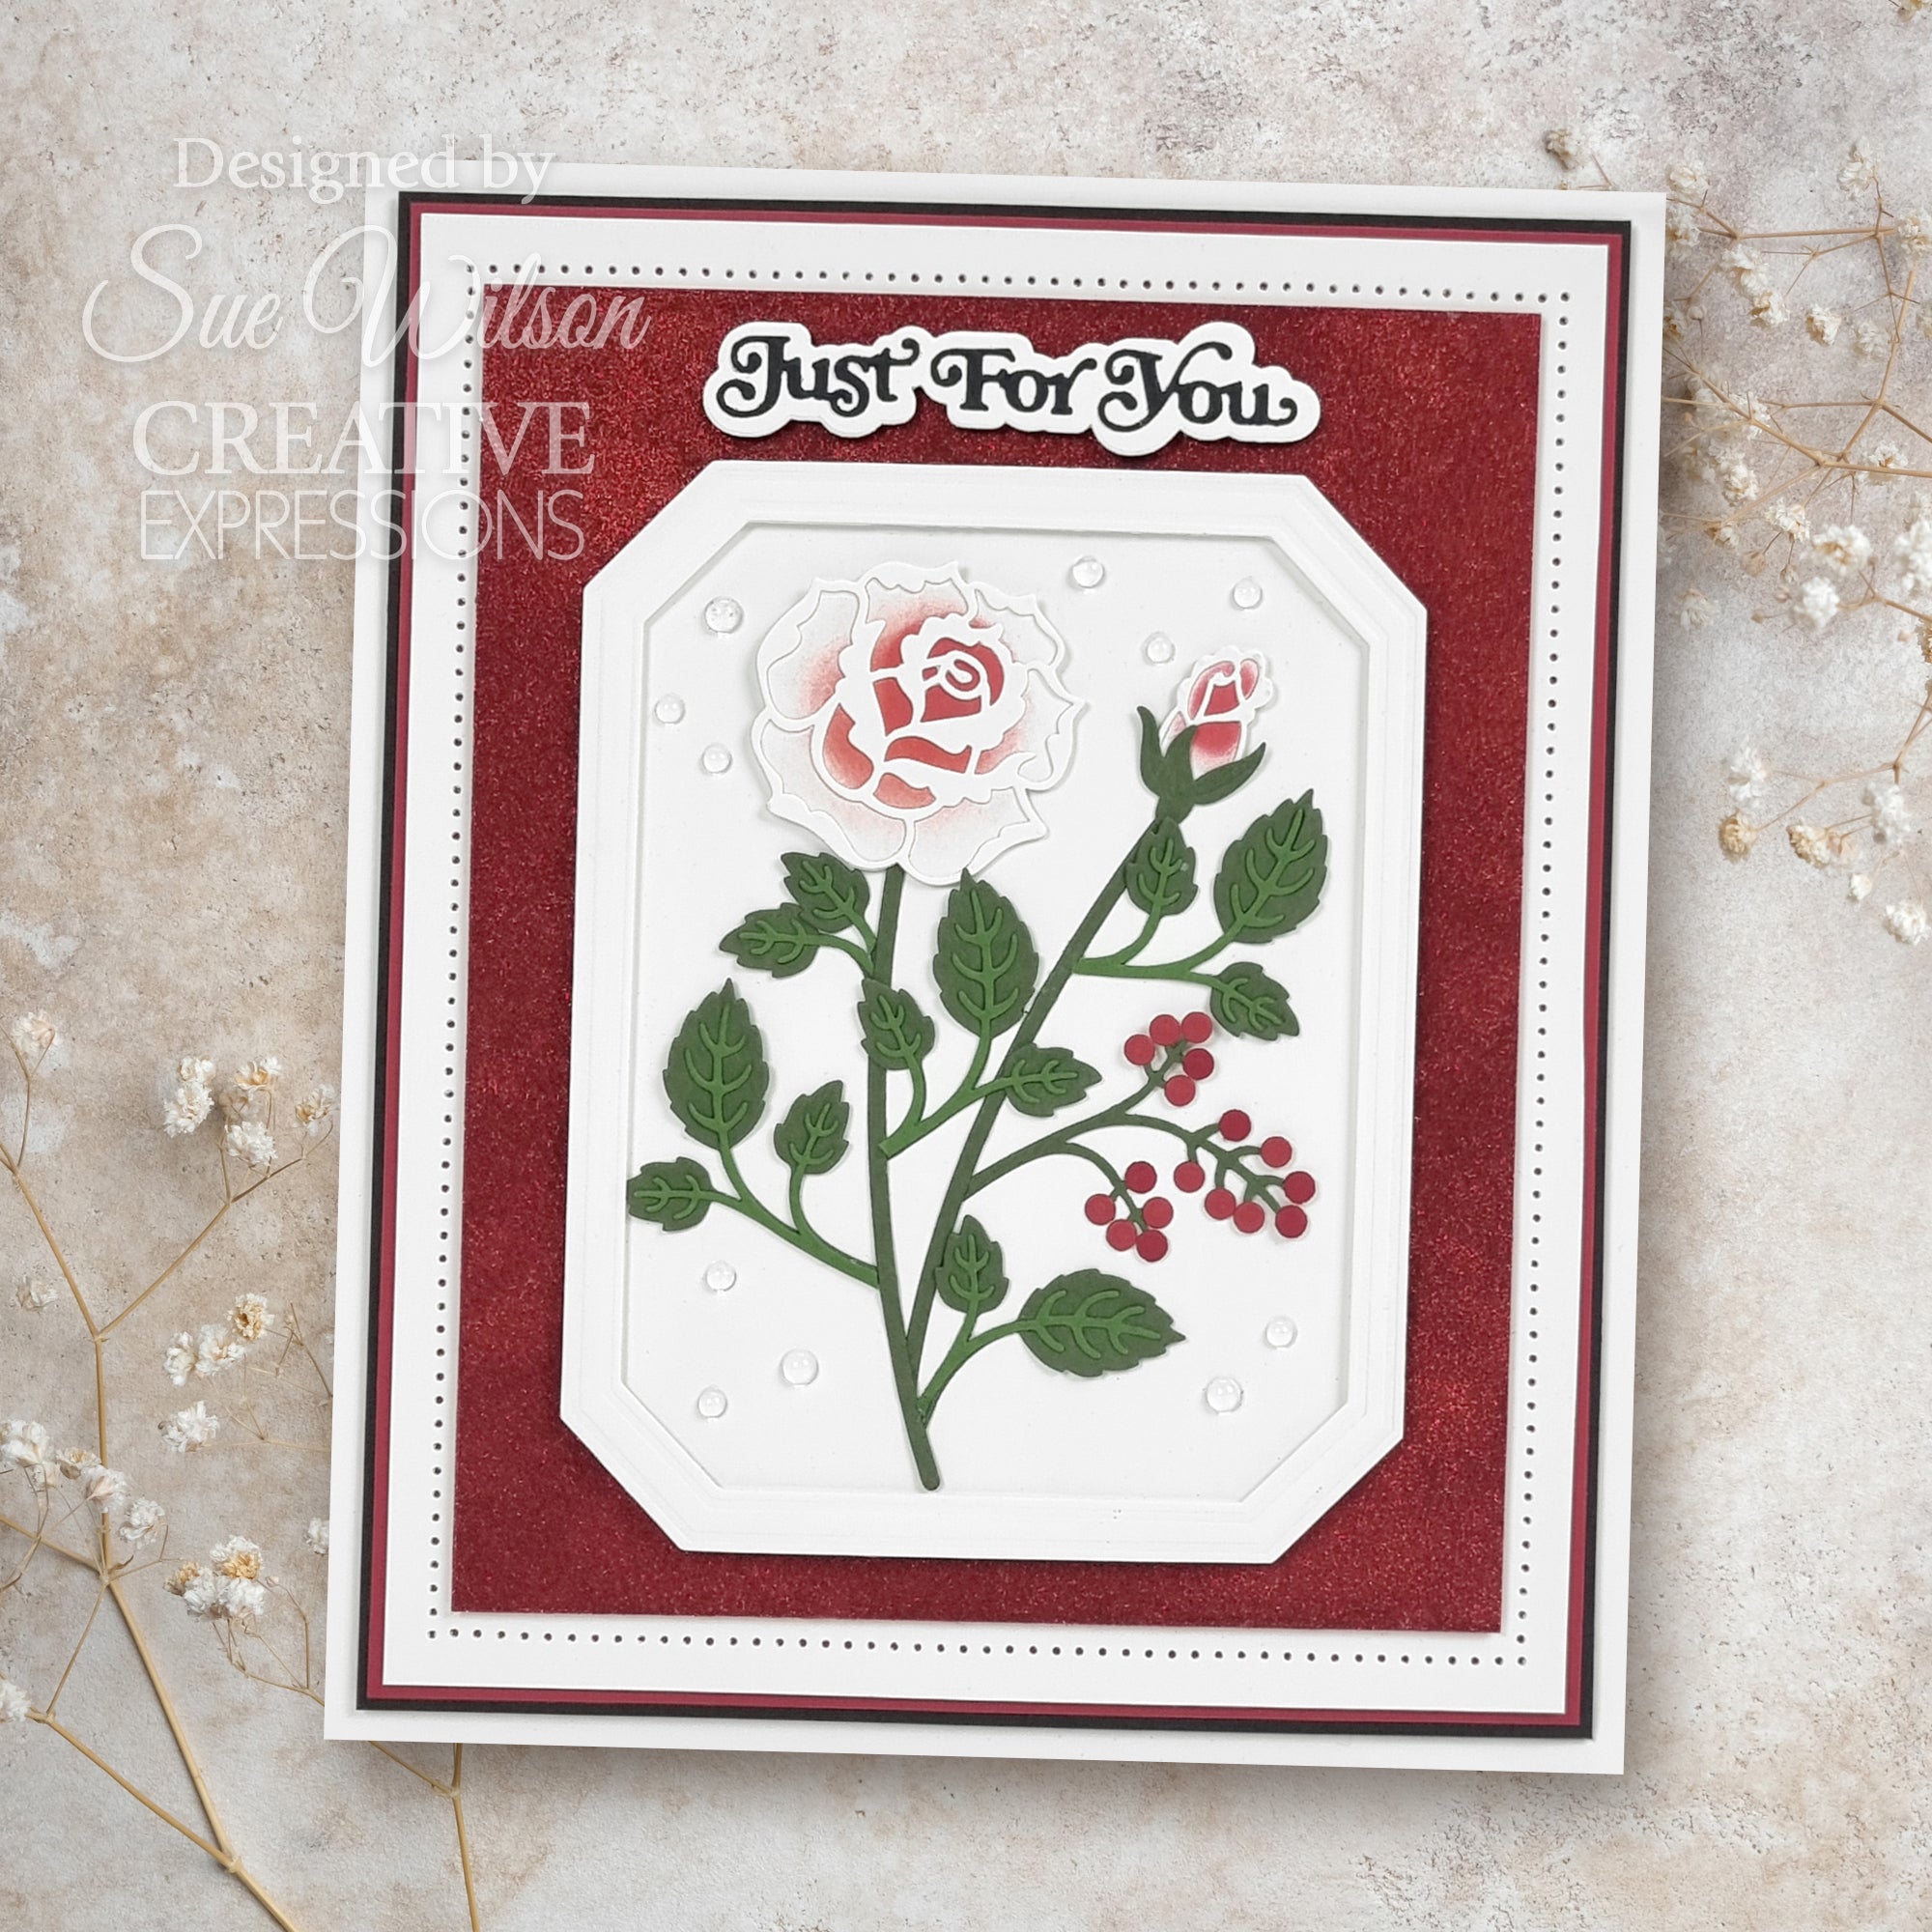 Creative Expressions Sue Wilson Mini Shadowed Sentiments Just For You Craft Die